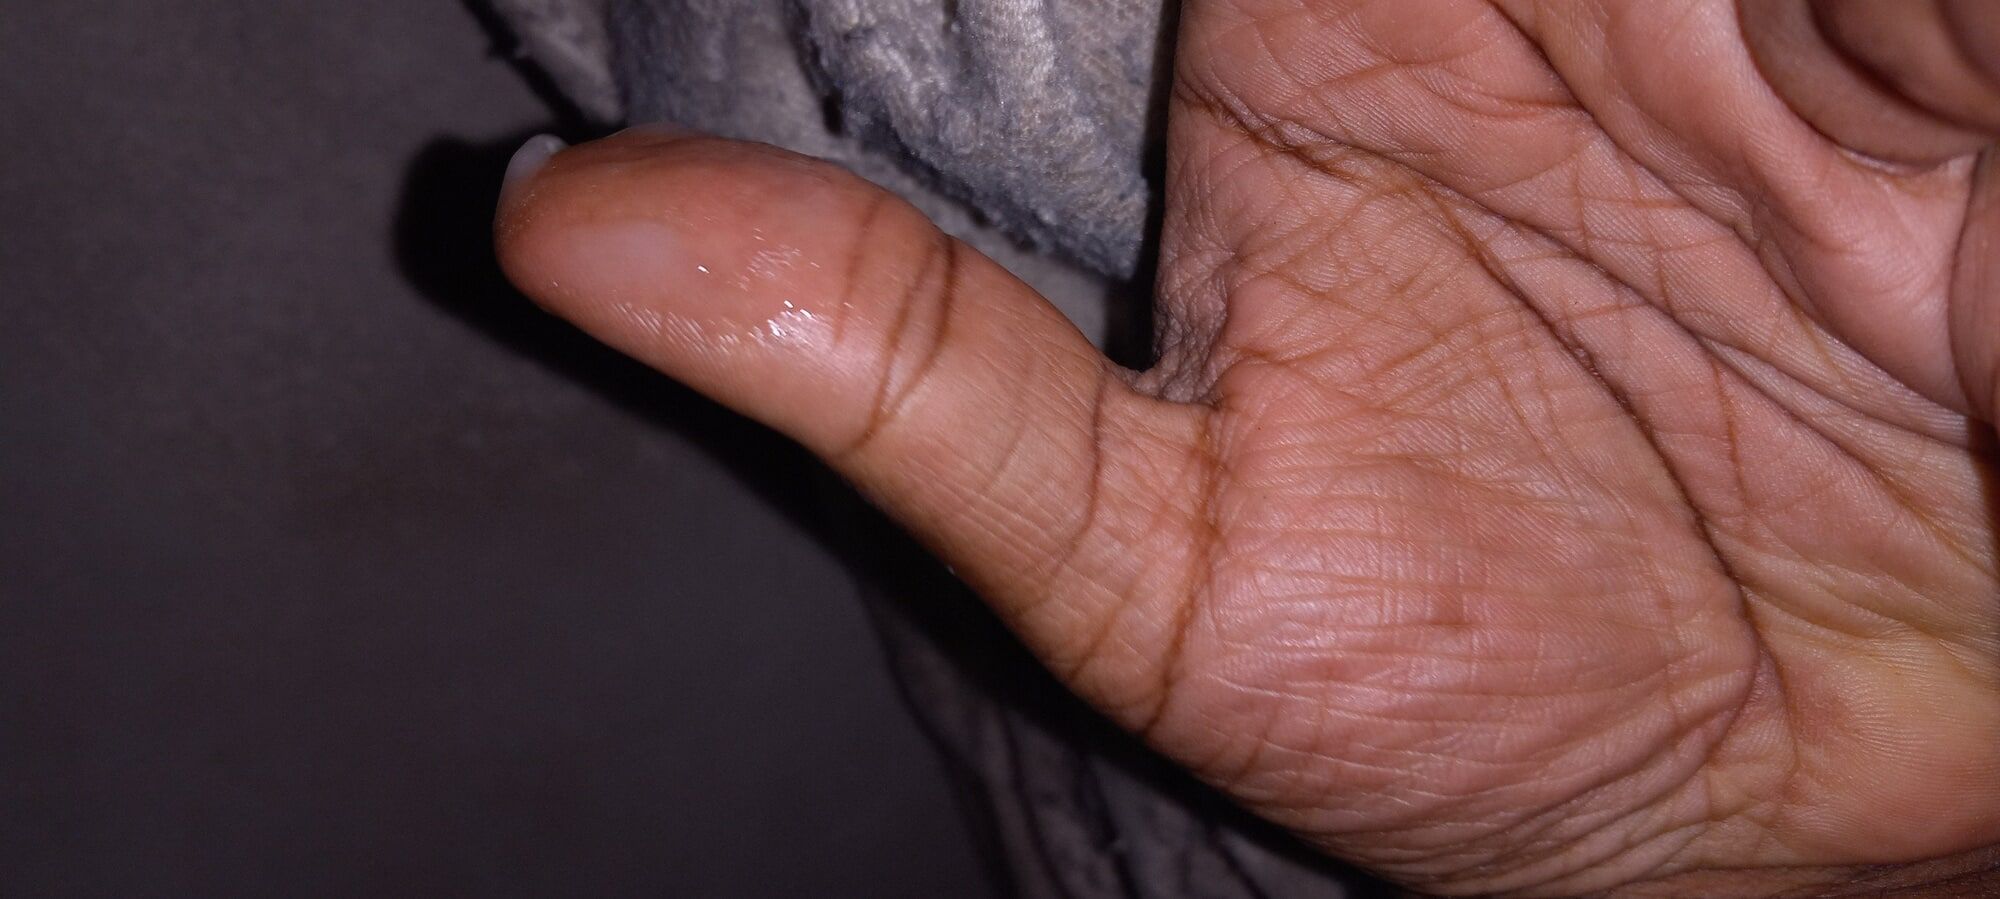 Cum on my thumb and wet on my hands from masturbation #7